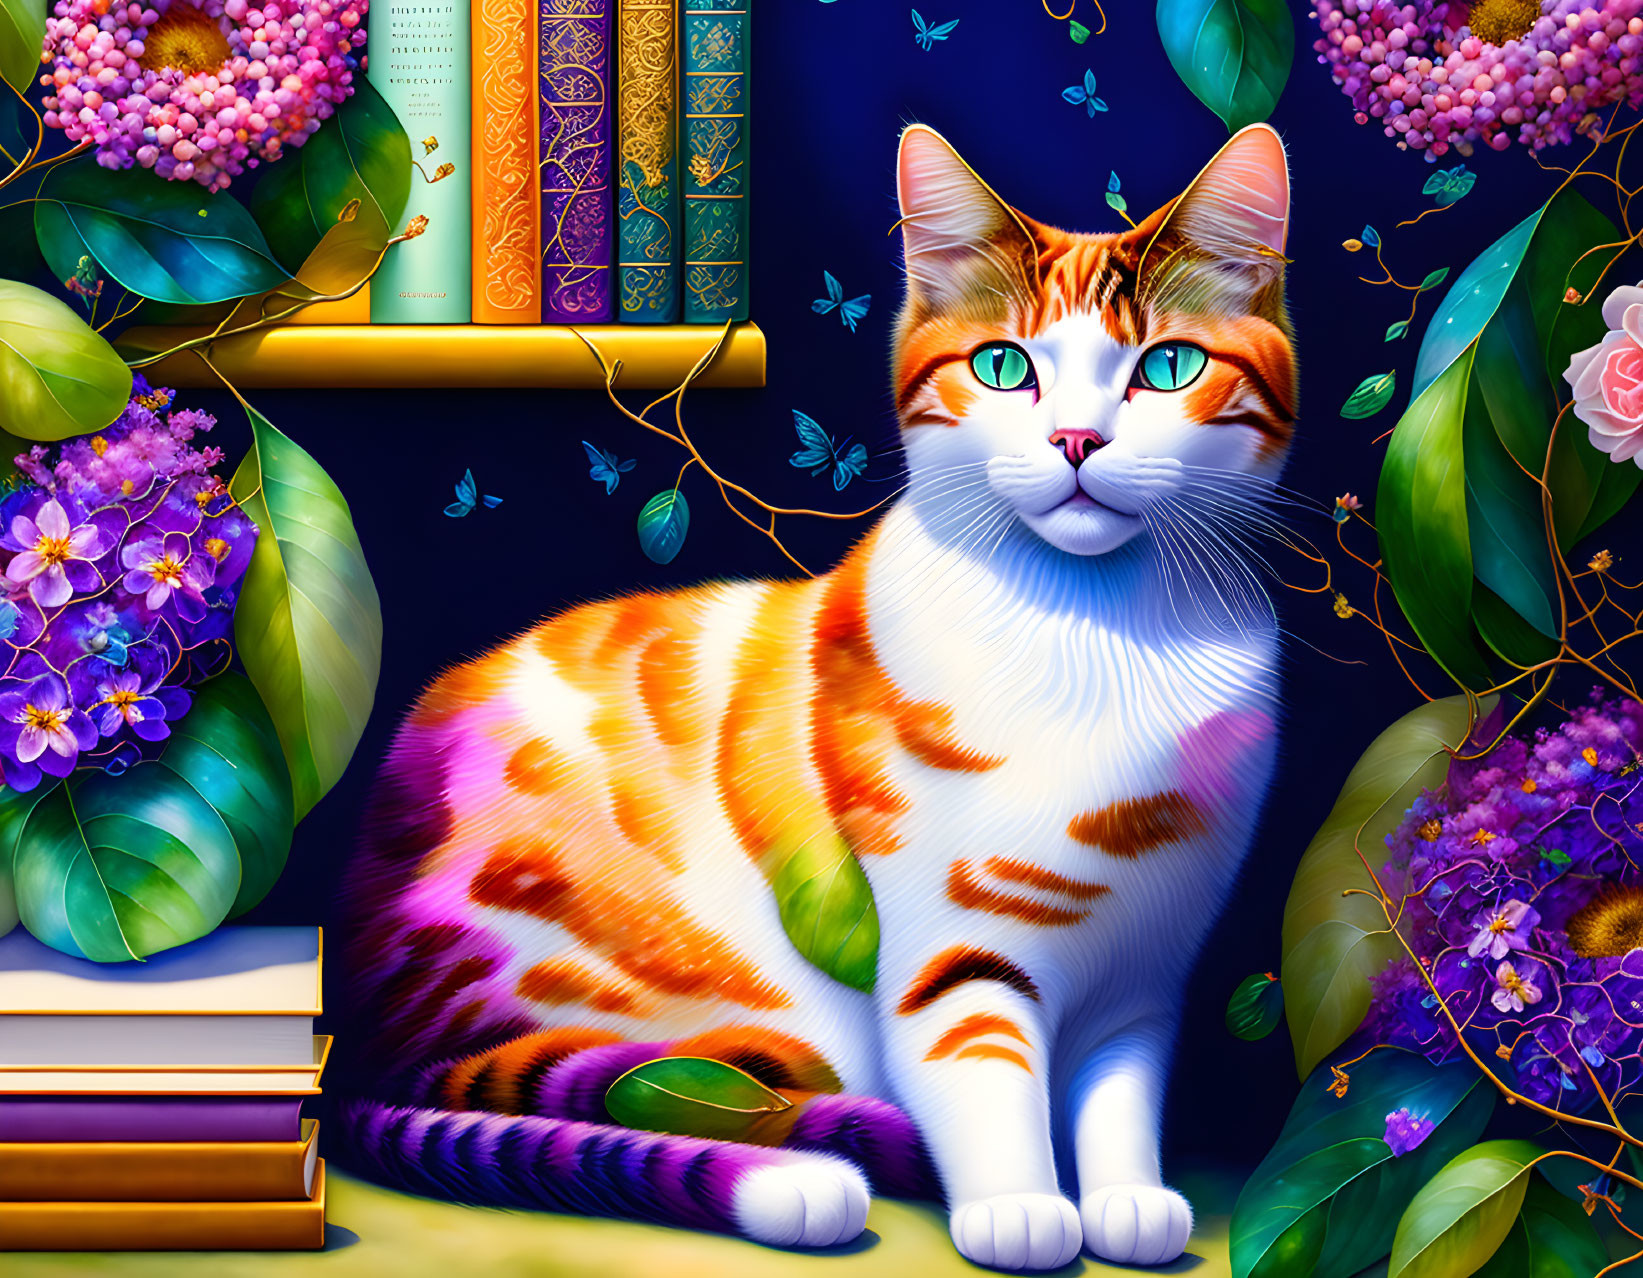 Vibrant cat illustration with green eyes, books, flowers, and butterflies